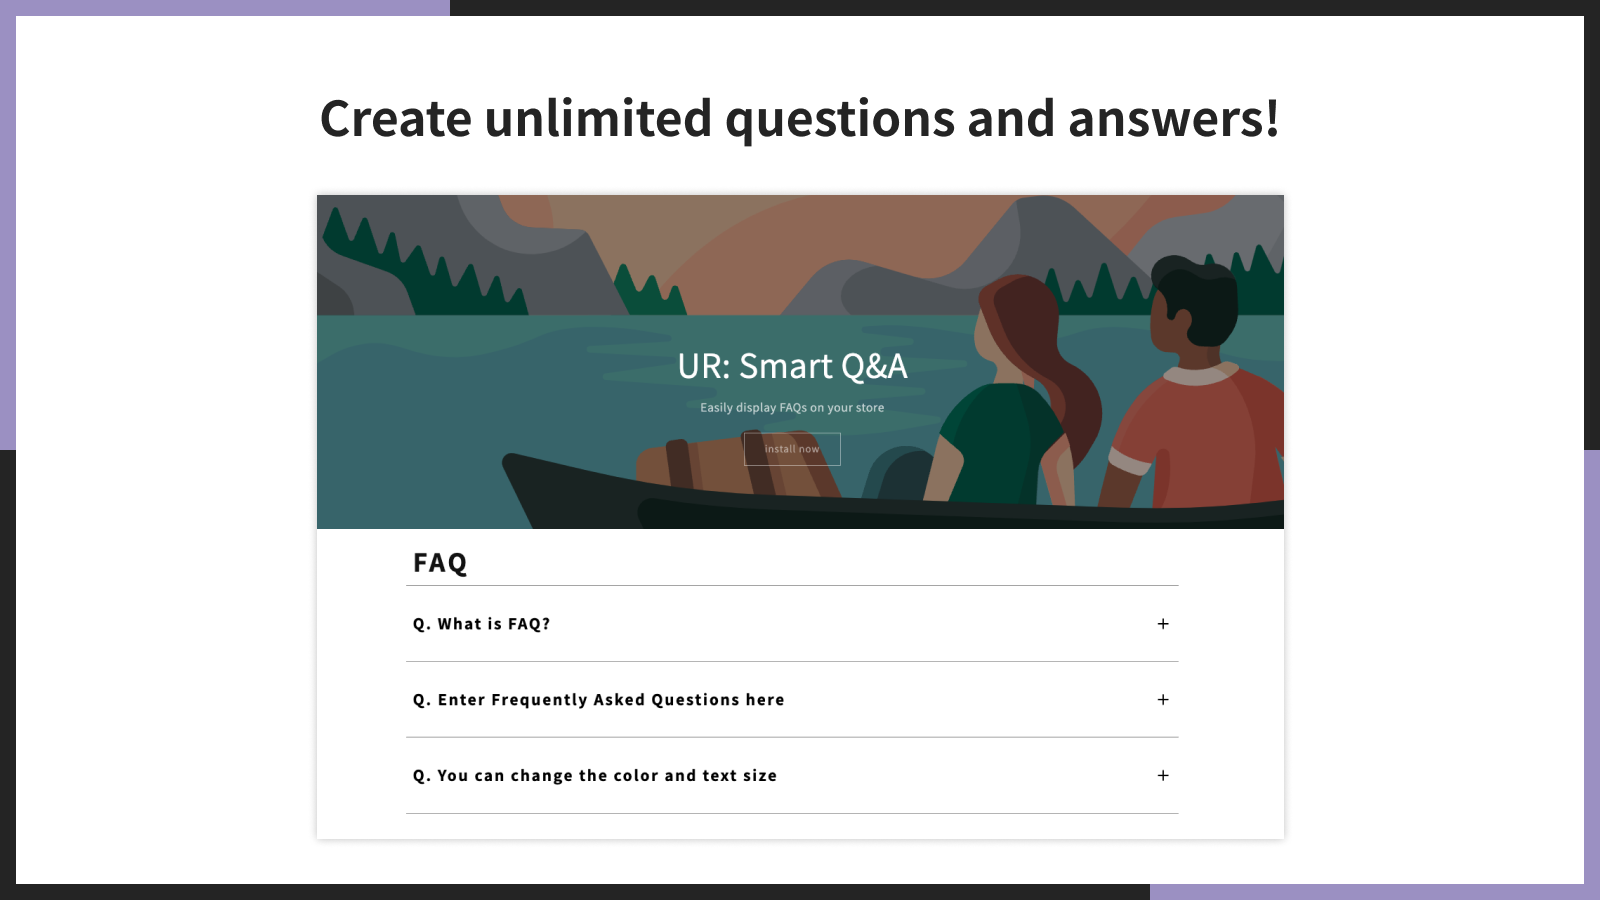 Created unlimited questions and answers.